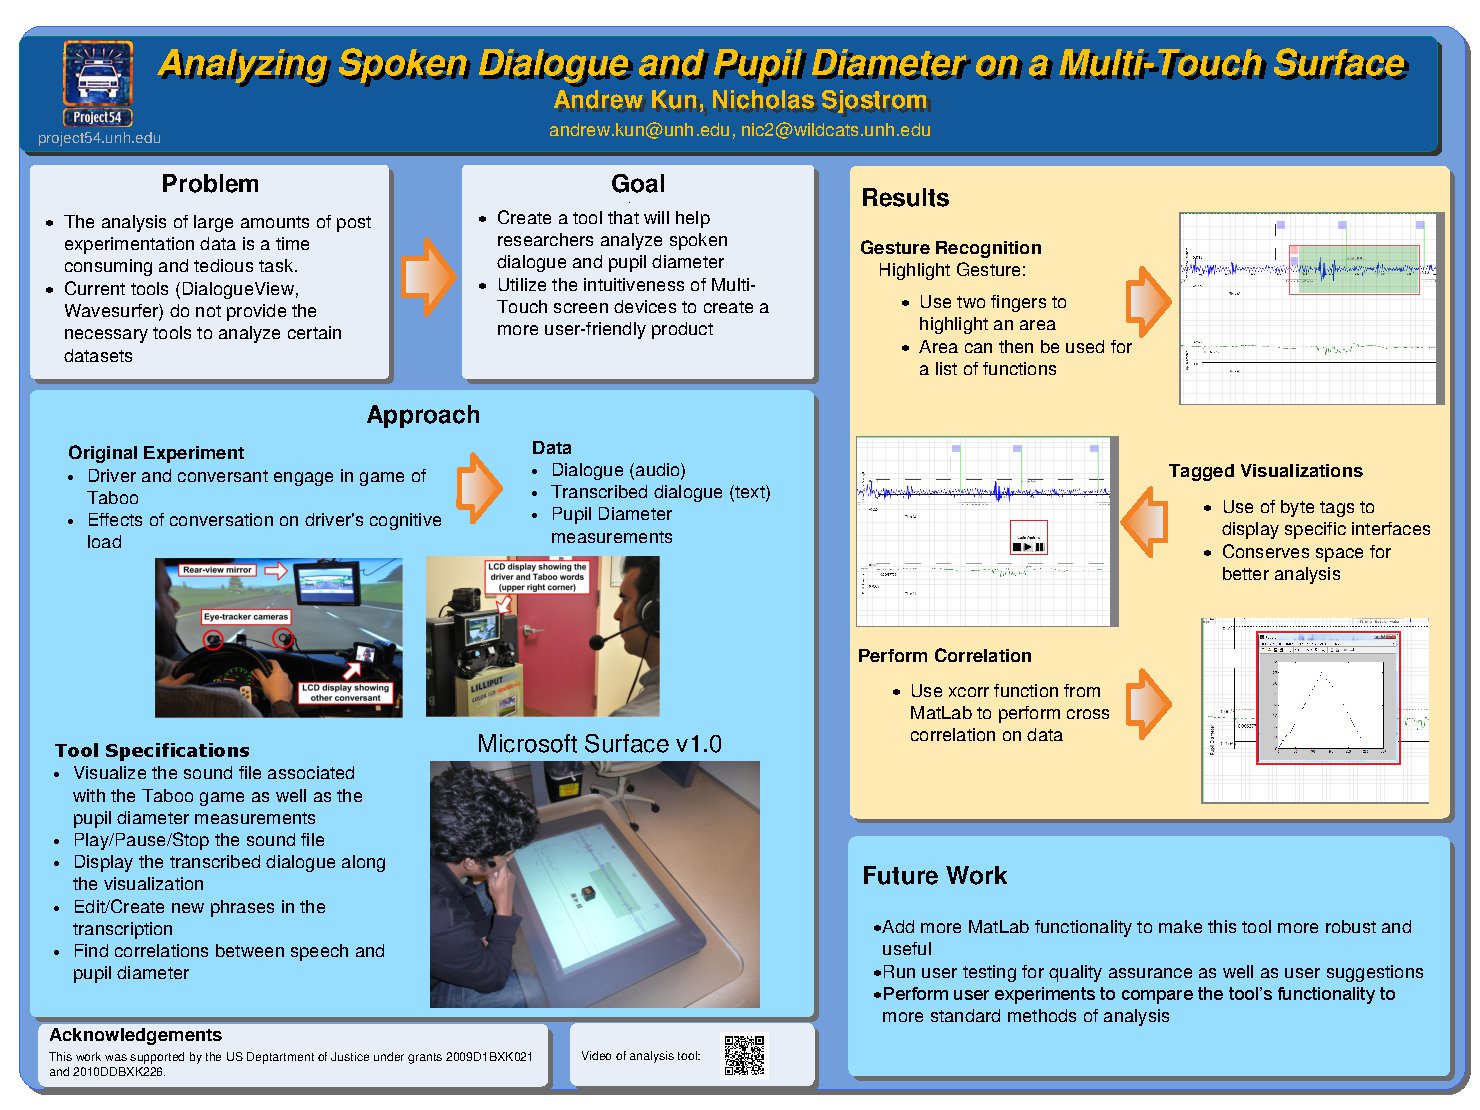 Analyzing Spoken Dialogue And Pupil Diameter On A Multi-Touch Surface by nsjostrom